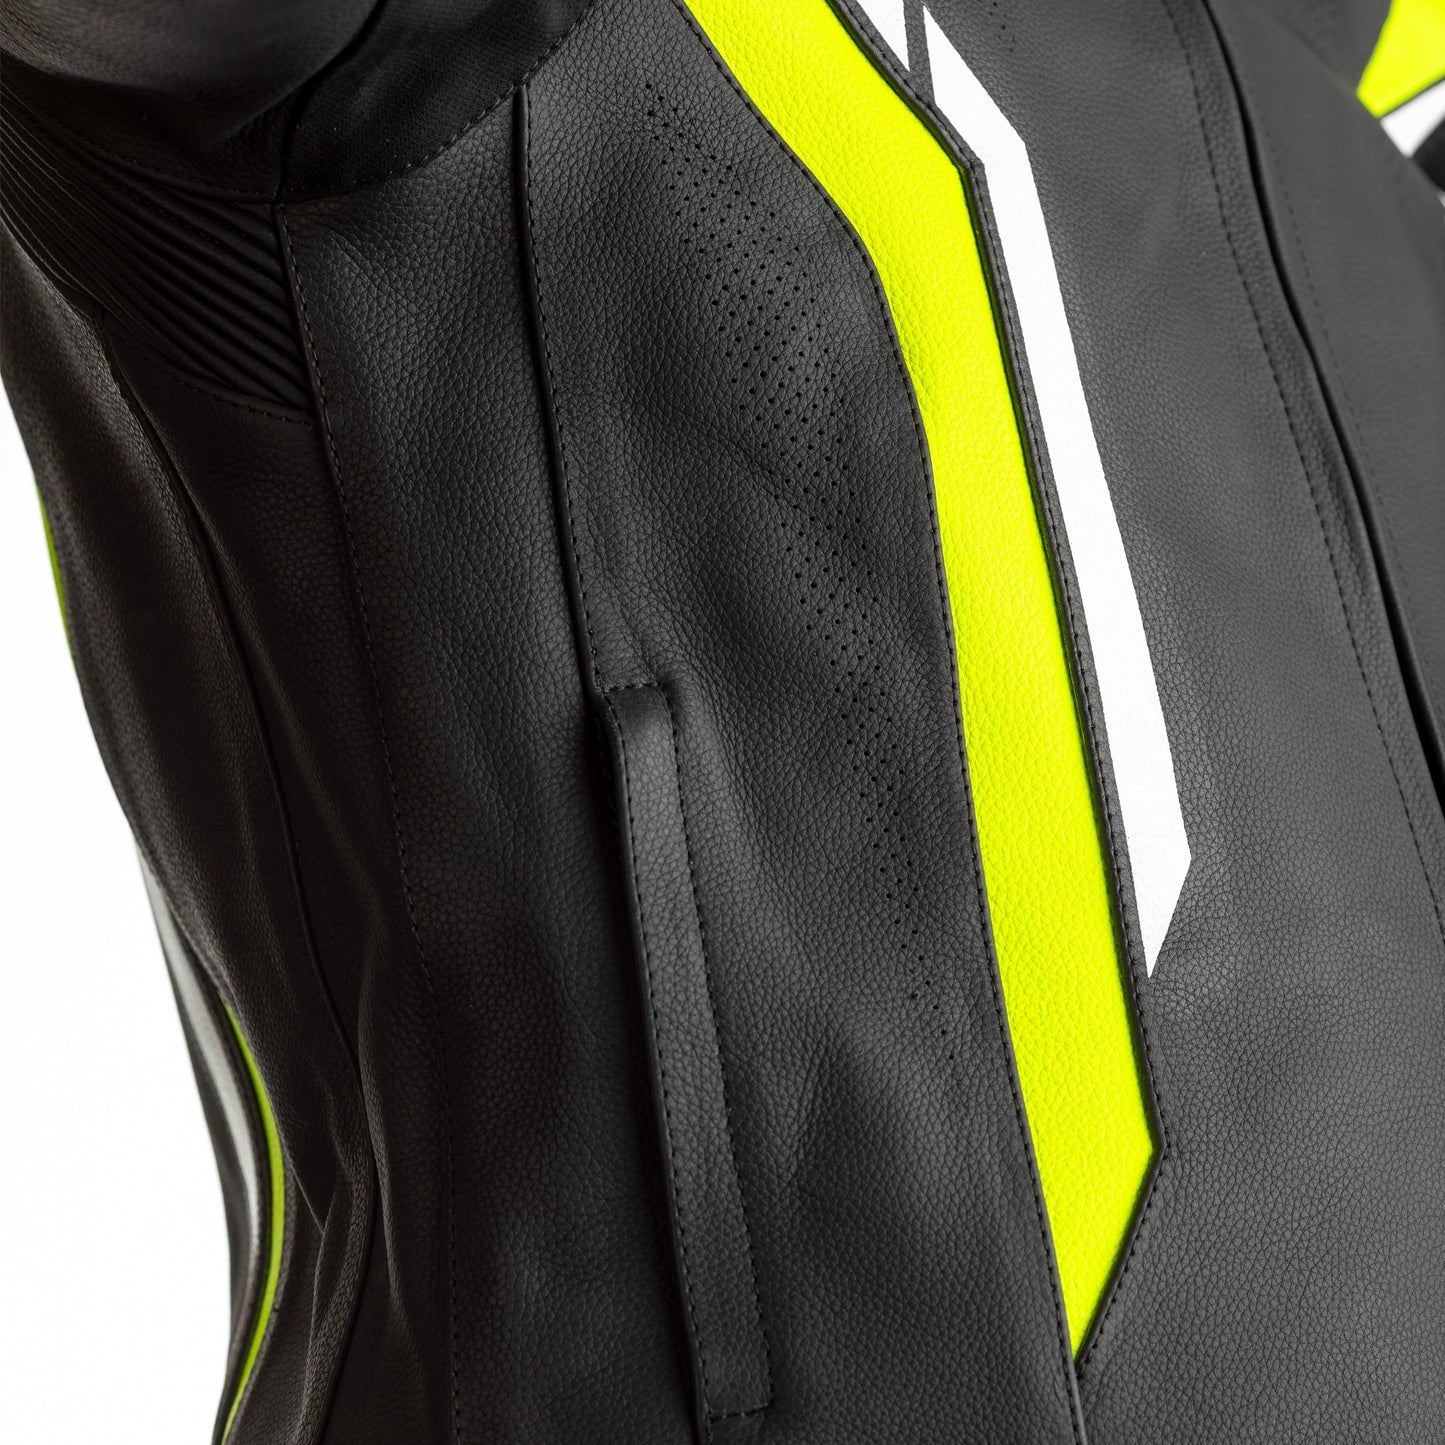 RST Axis (CE) Mens Leather Jacket - Black / White / Flo Yellow